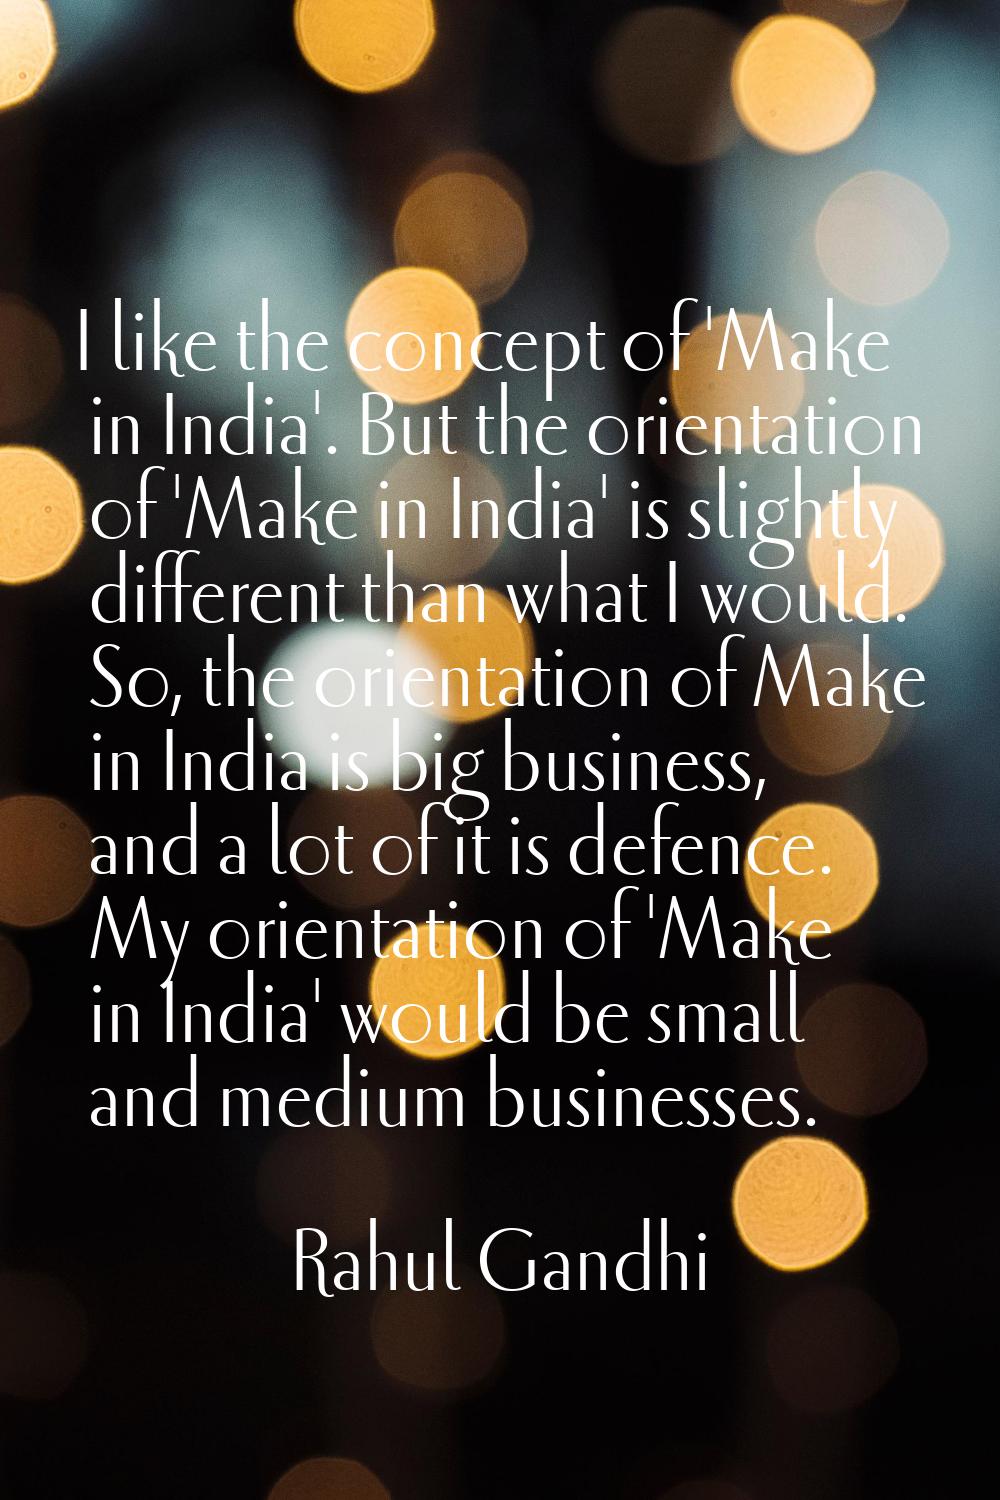 I like the concept of 'Make in India'. But the orientation of 'Make in India' is slightly different